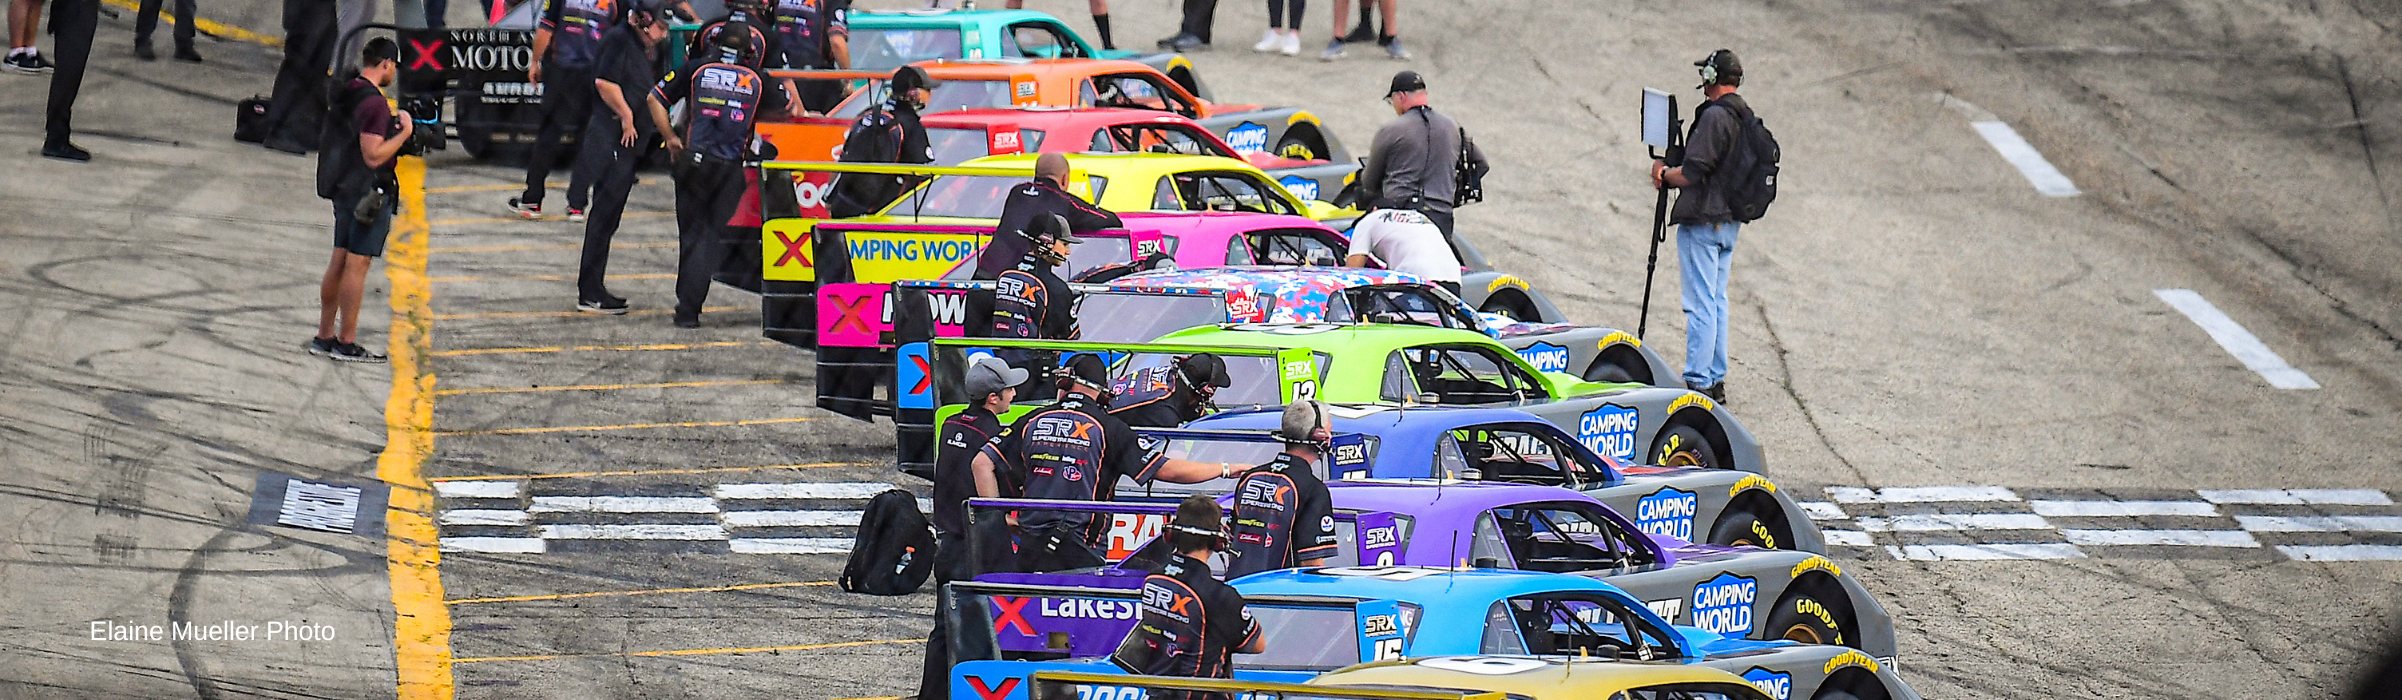 Camping World SRX series race cards lined up at Slinger Speedway in July 2021